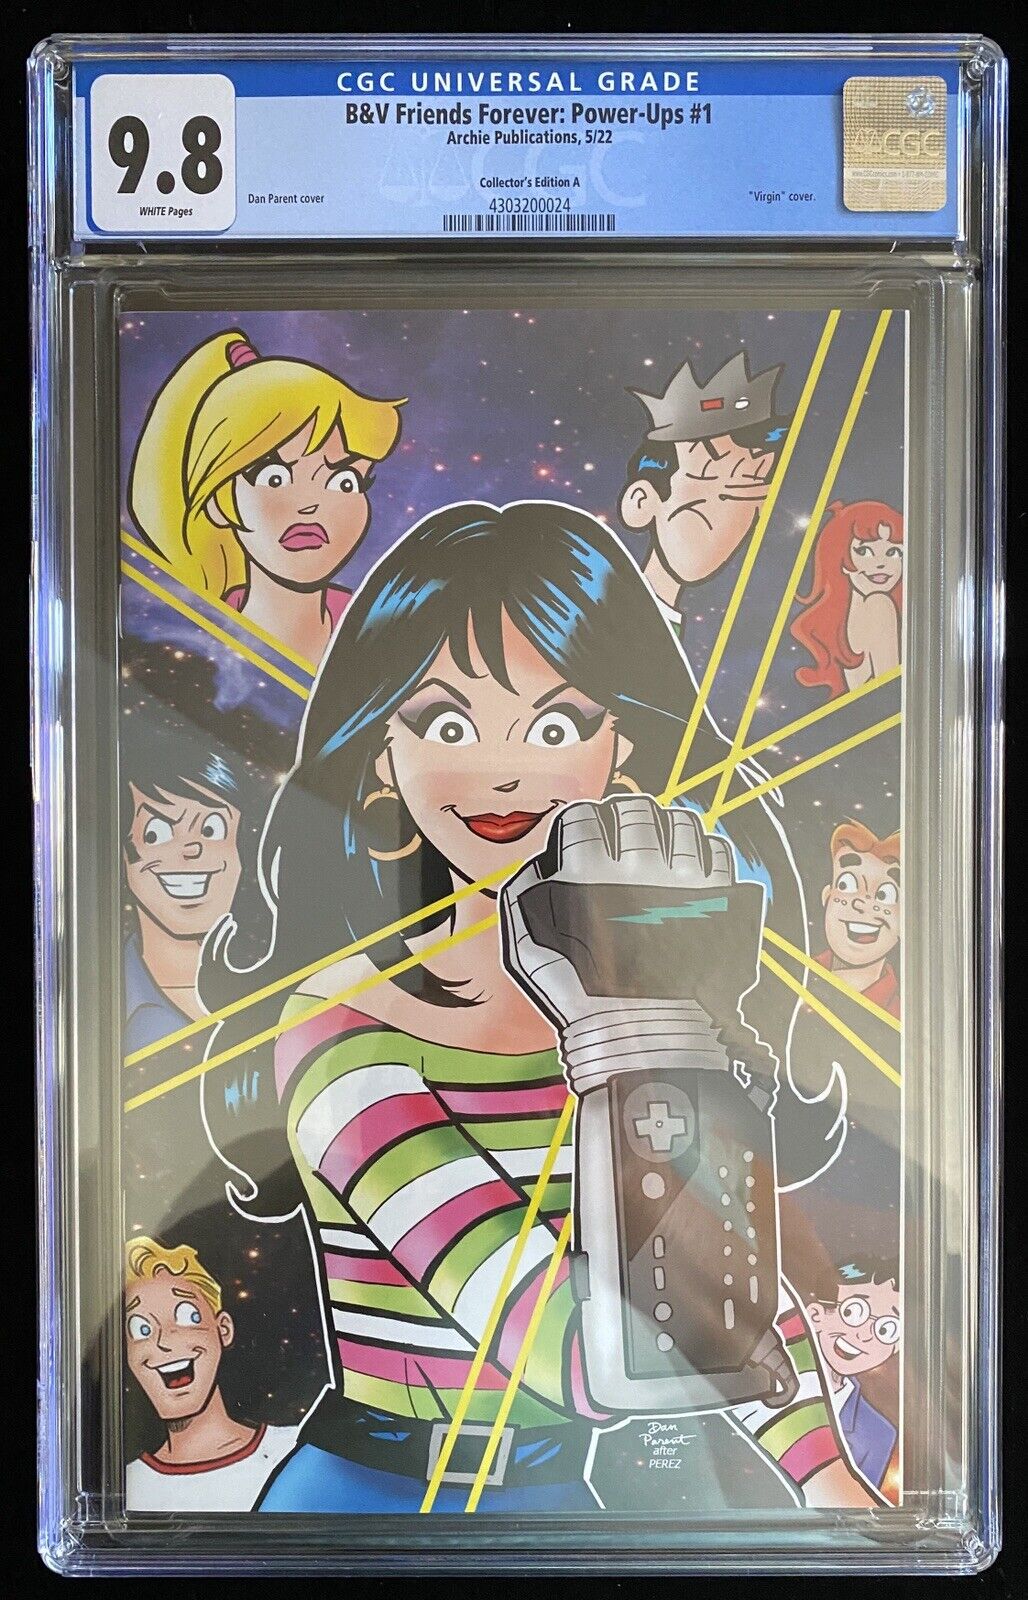 B&V Friends Forever: Power-Ups #1 CGC 9.8 (2022) Collector’s Edition A Ltd 250 